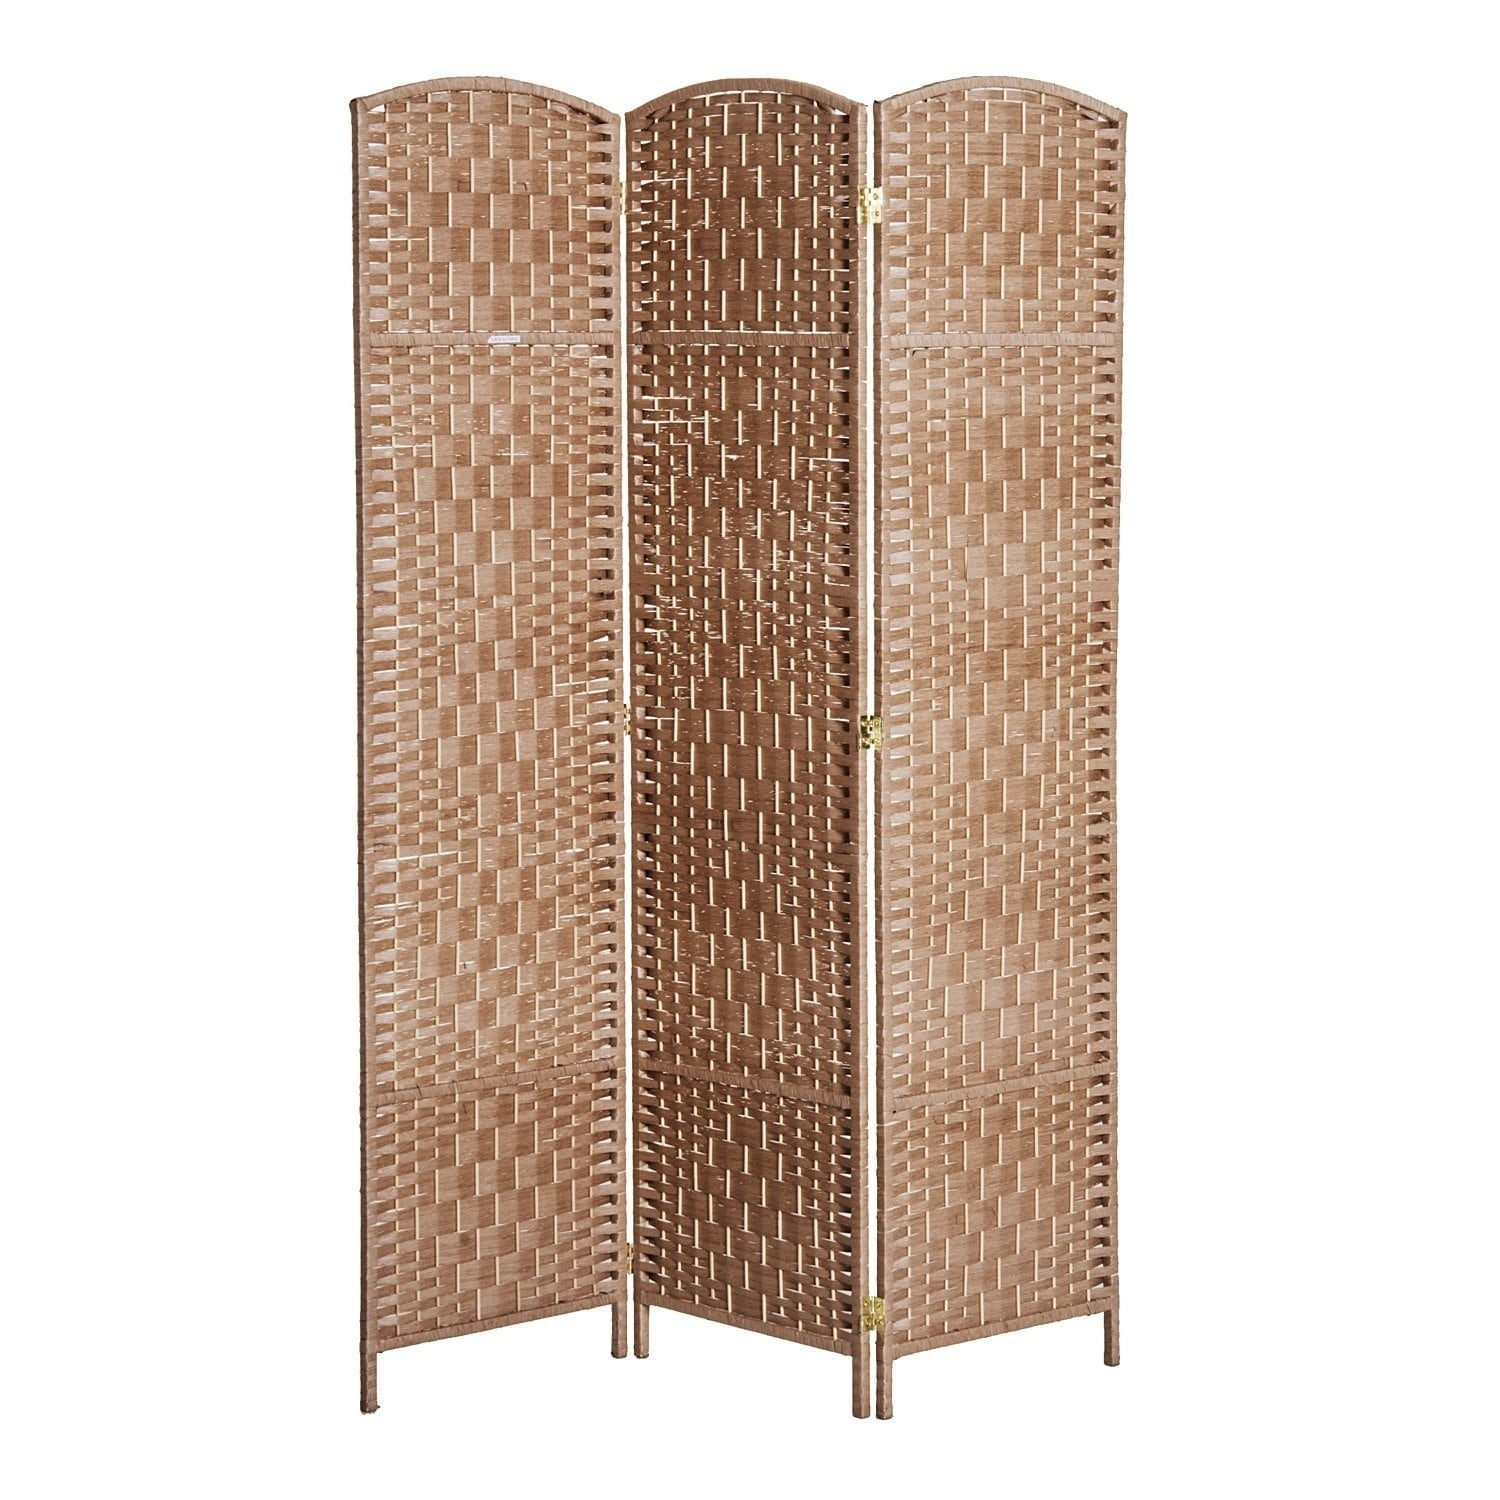 HomCom 6' Tall Wicker Weave Three Panel Room Divider Privacy Screen  Natural Blonde Wood On Sale Bed Bath  Beyond 22306879